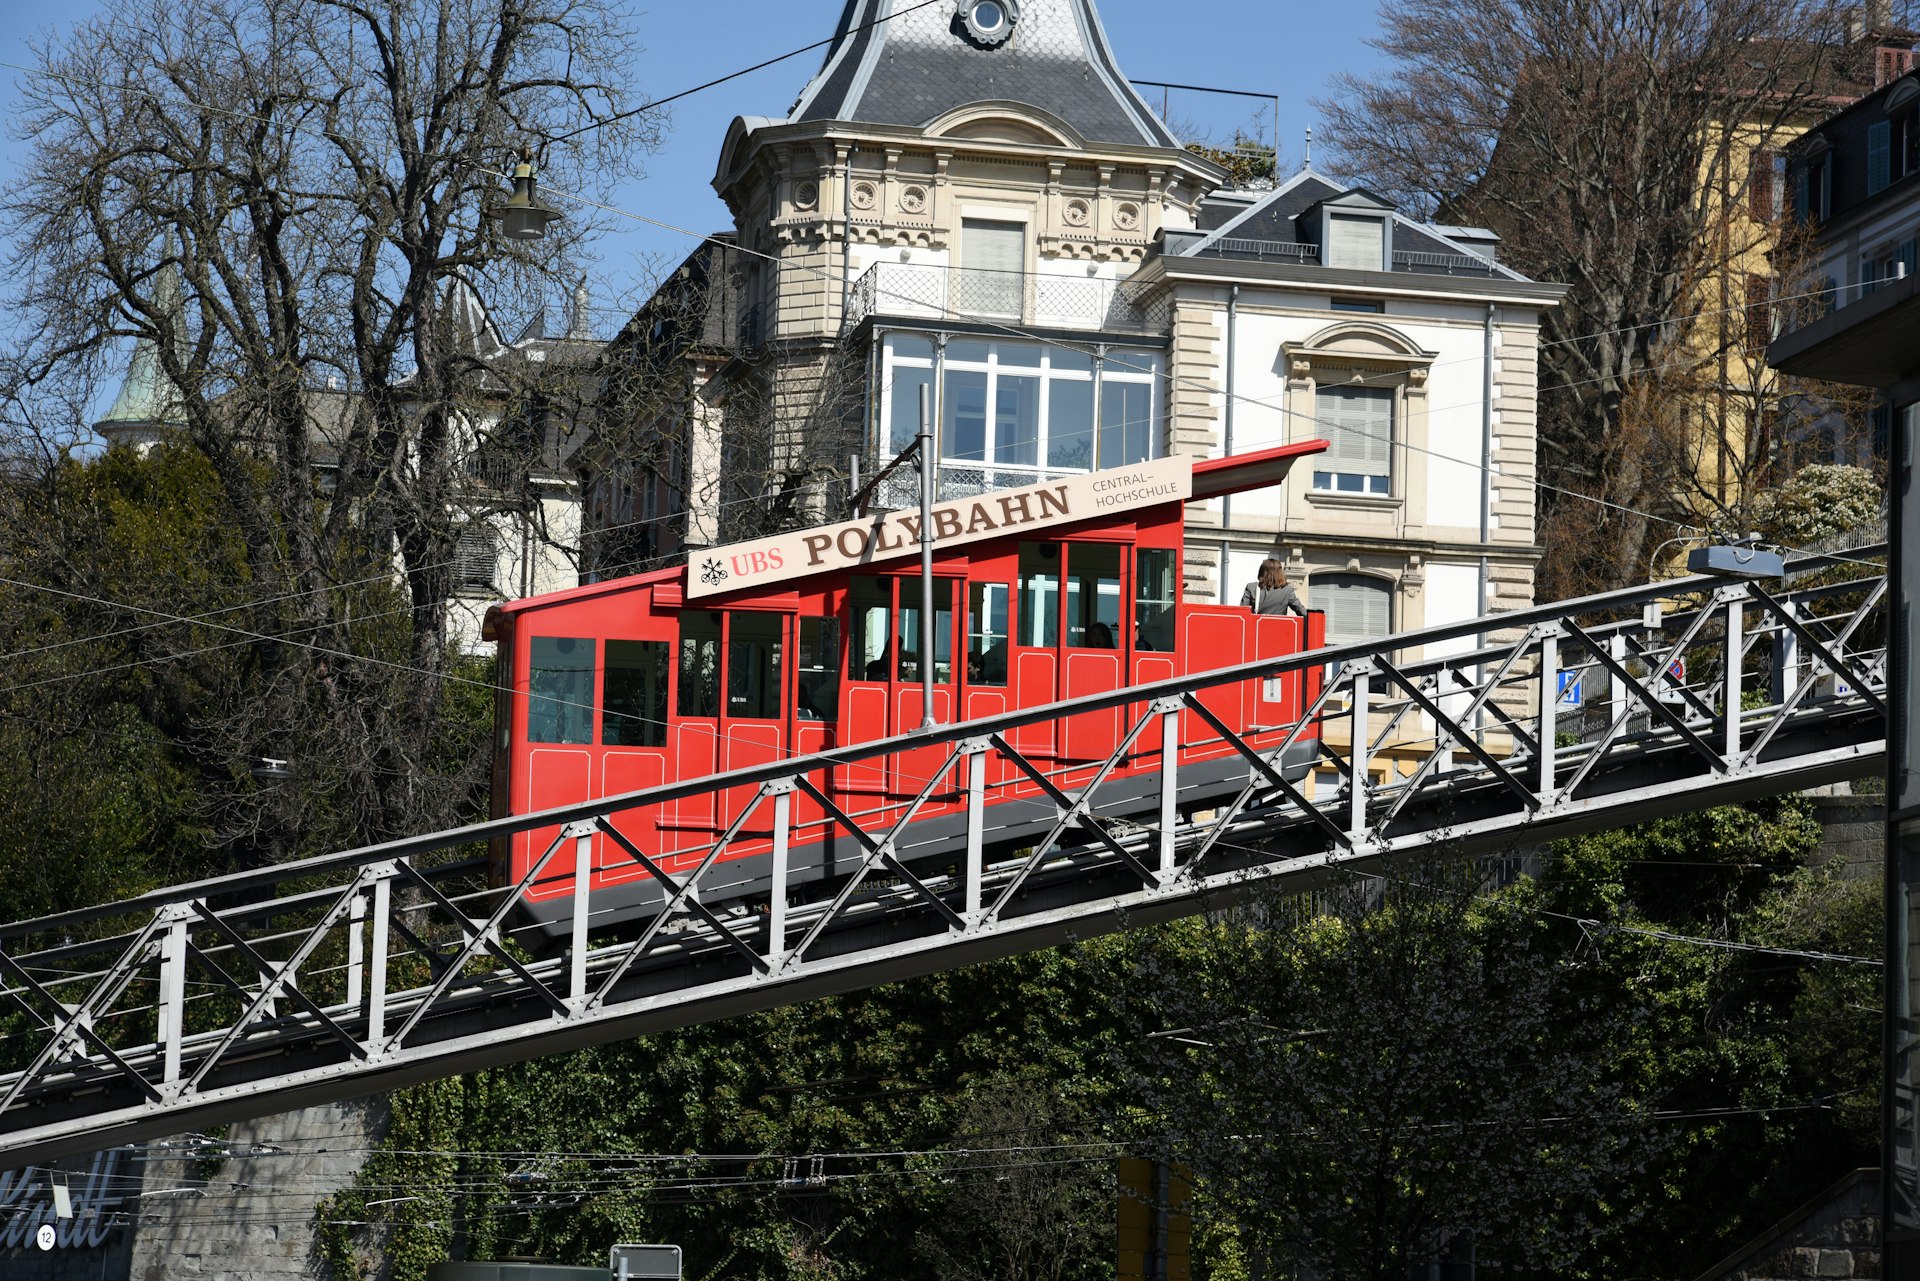 The small and famous Polybahn connects Zurich Central with the University Zurich. The Polybahn was built in 1886 and the travel distance takes only 176 meters.